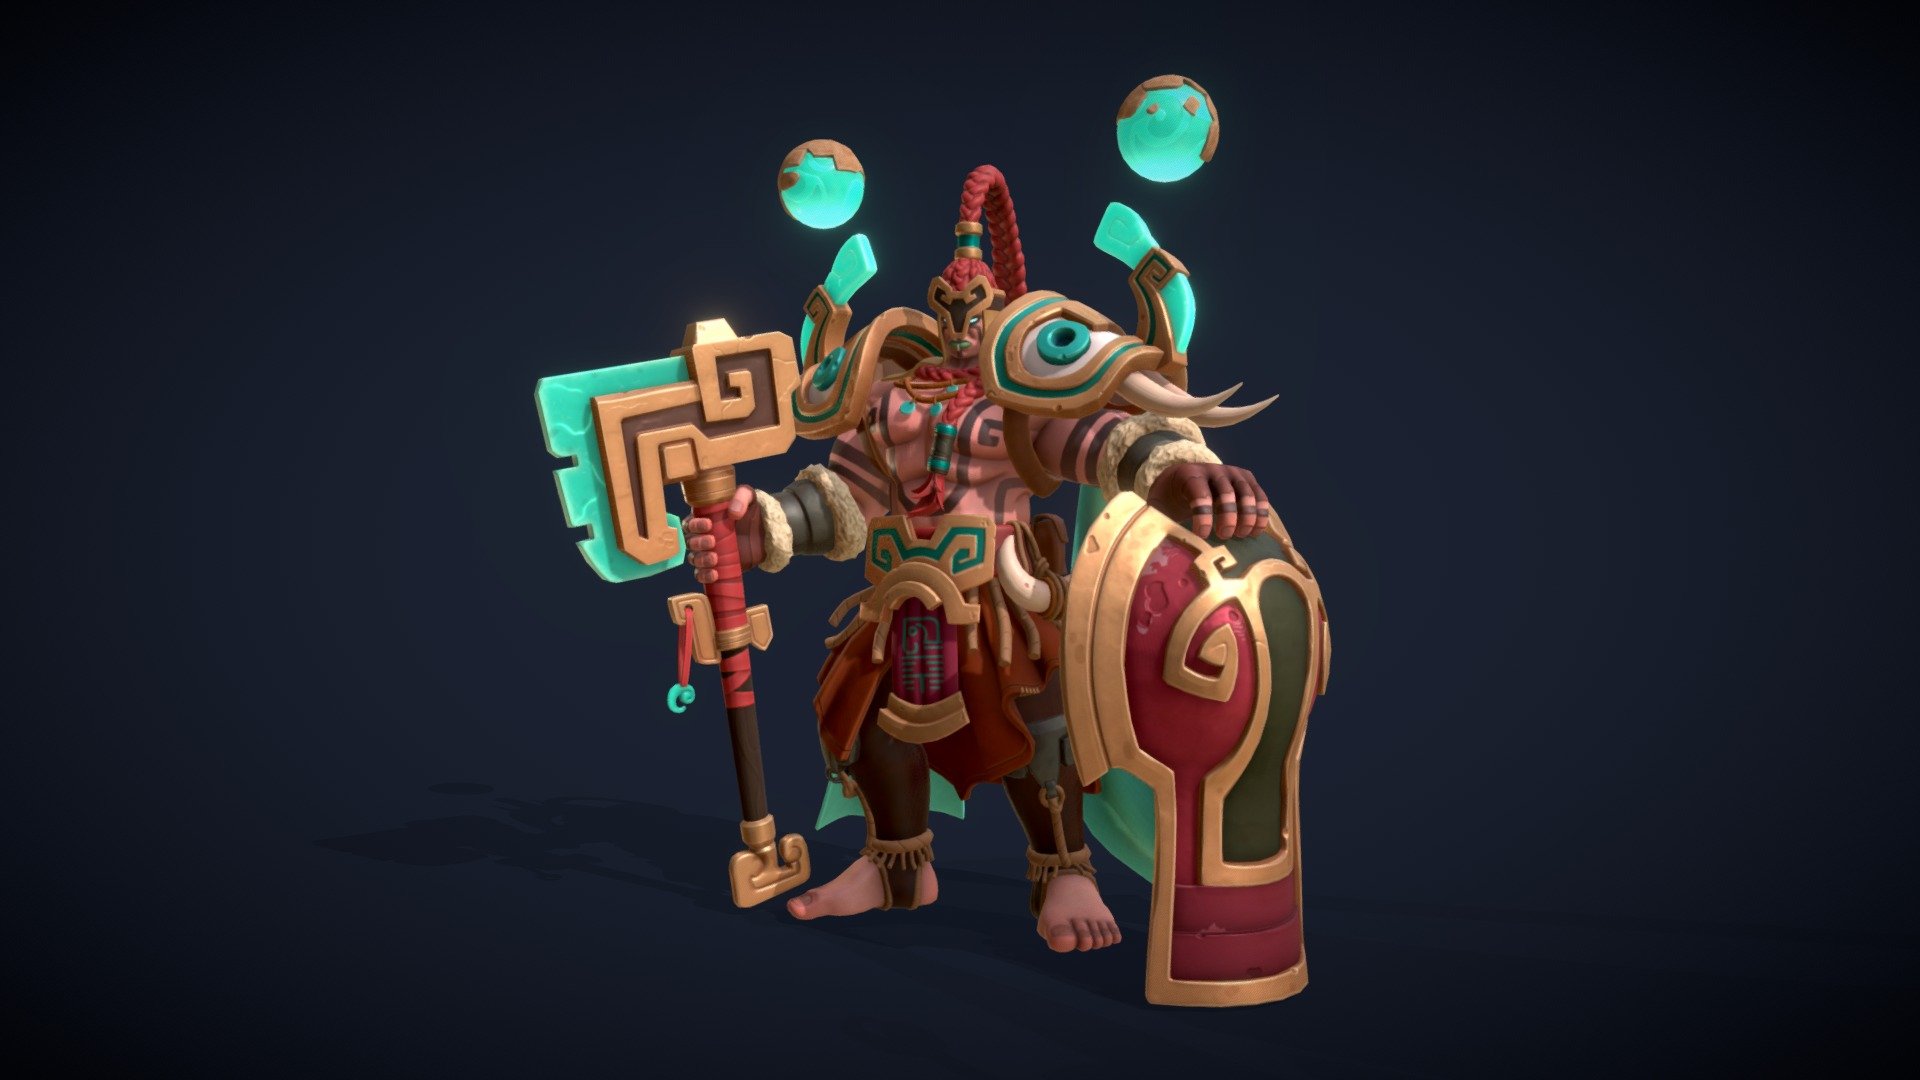 Personal project “Elephant Spirit Warrior”
Meet the Elephant Spirit Warrior, an ancient Aztec war spirit. This demi-god warrior swings his axe with one hand like a toy with, which is too heavy for an ordinary person to handle even with all of their full strength, and protecting himself from the dangers around him with his shield at the same time.

View full project on Artstastion https://www.artstation.com/artwork/8byYyw - Elephant Spirit Warrior - 3D model by Atilay 3d model